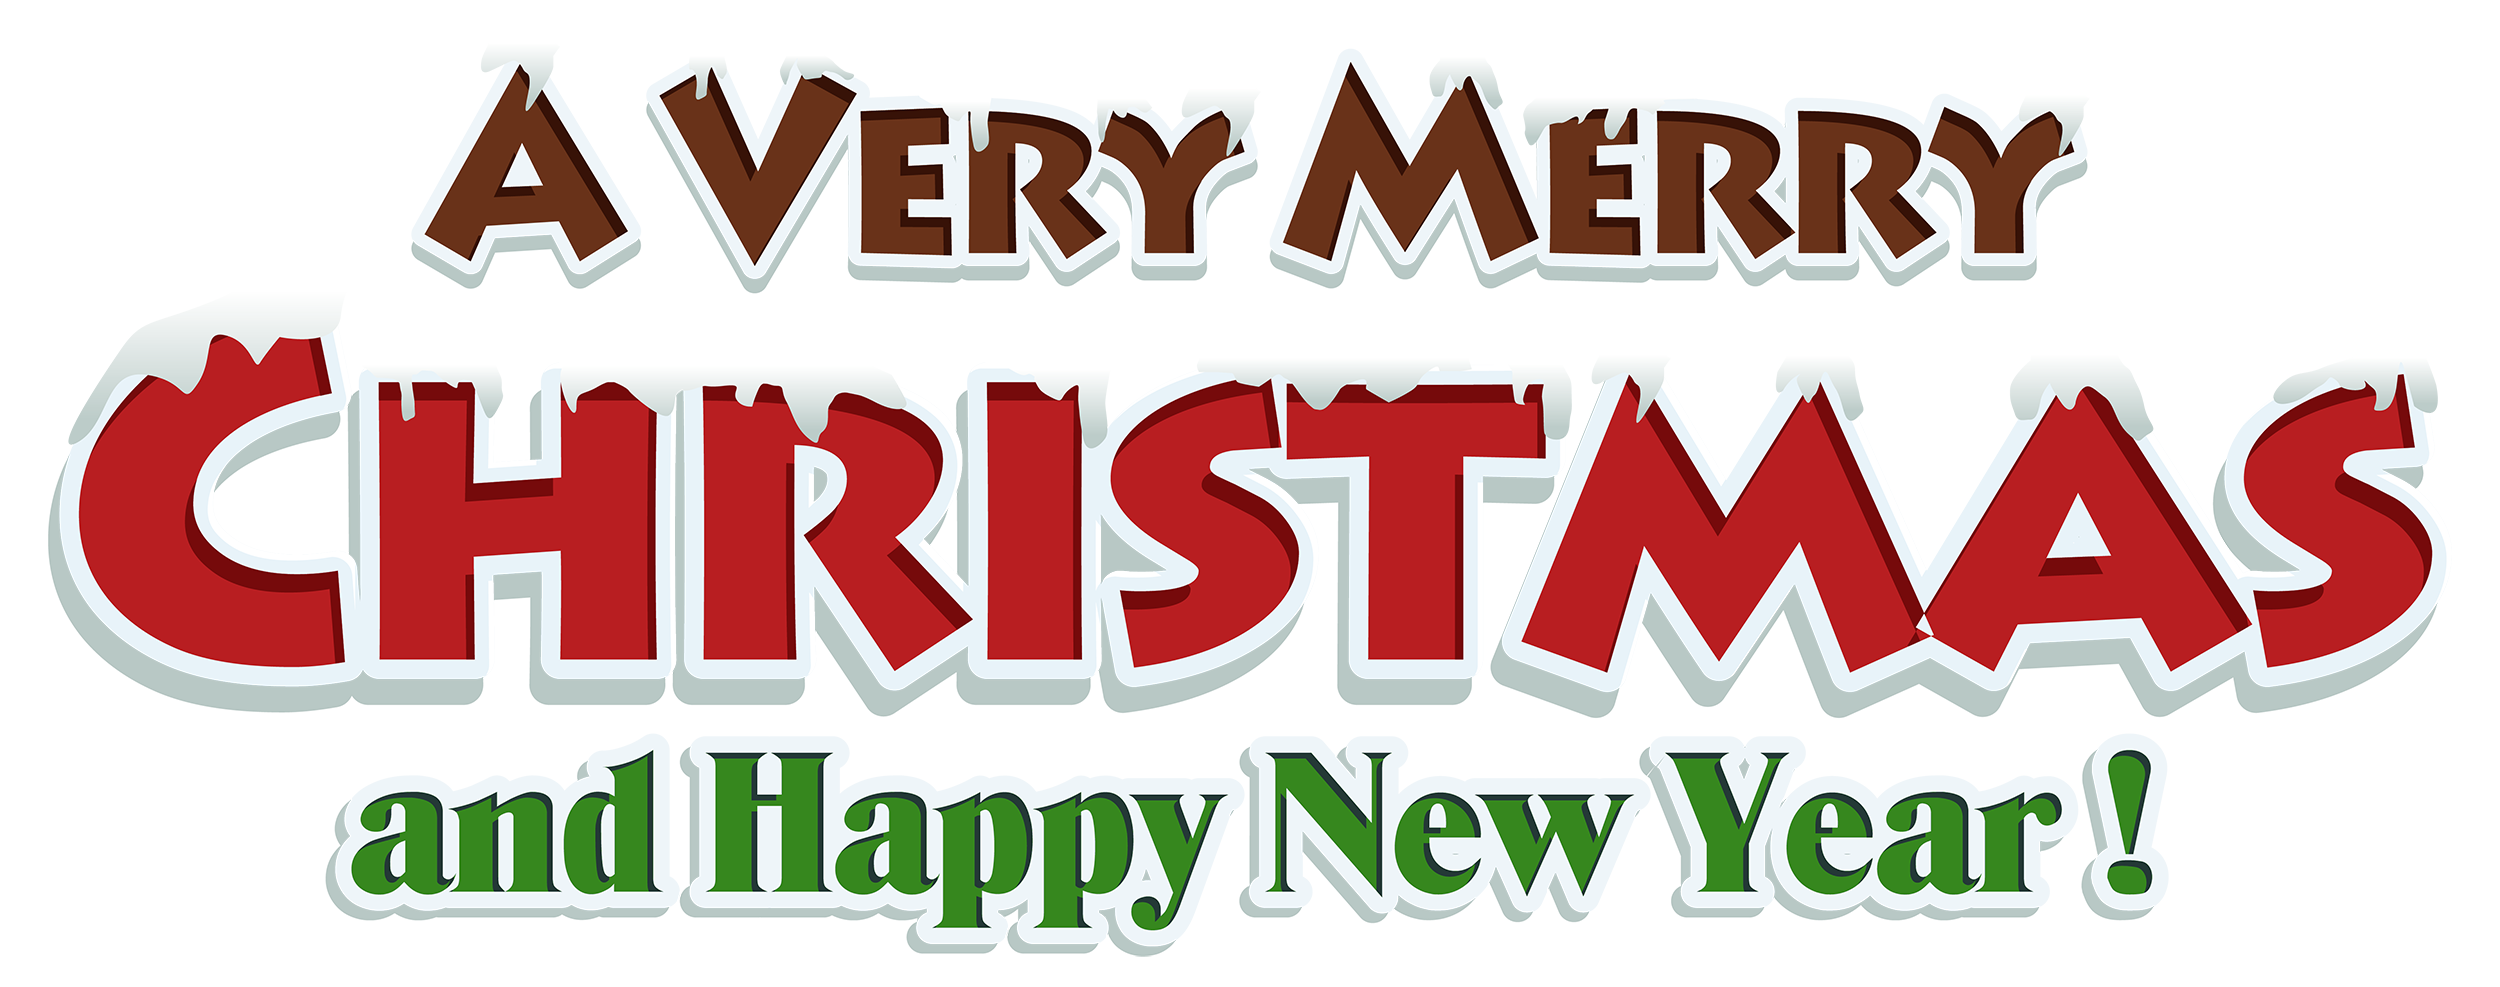 Merry christmas clip art banner hd new hd template images